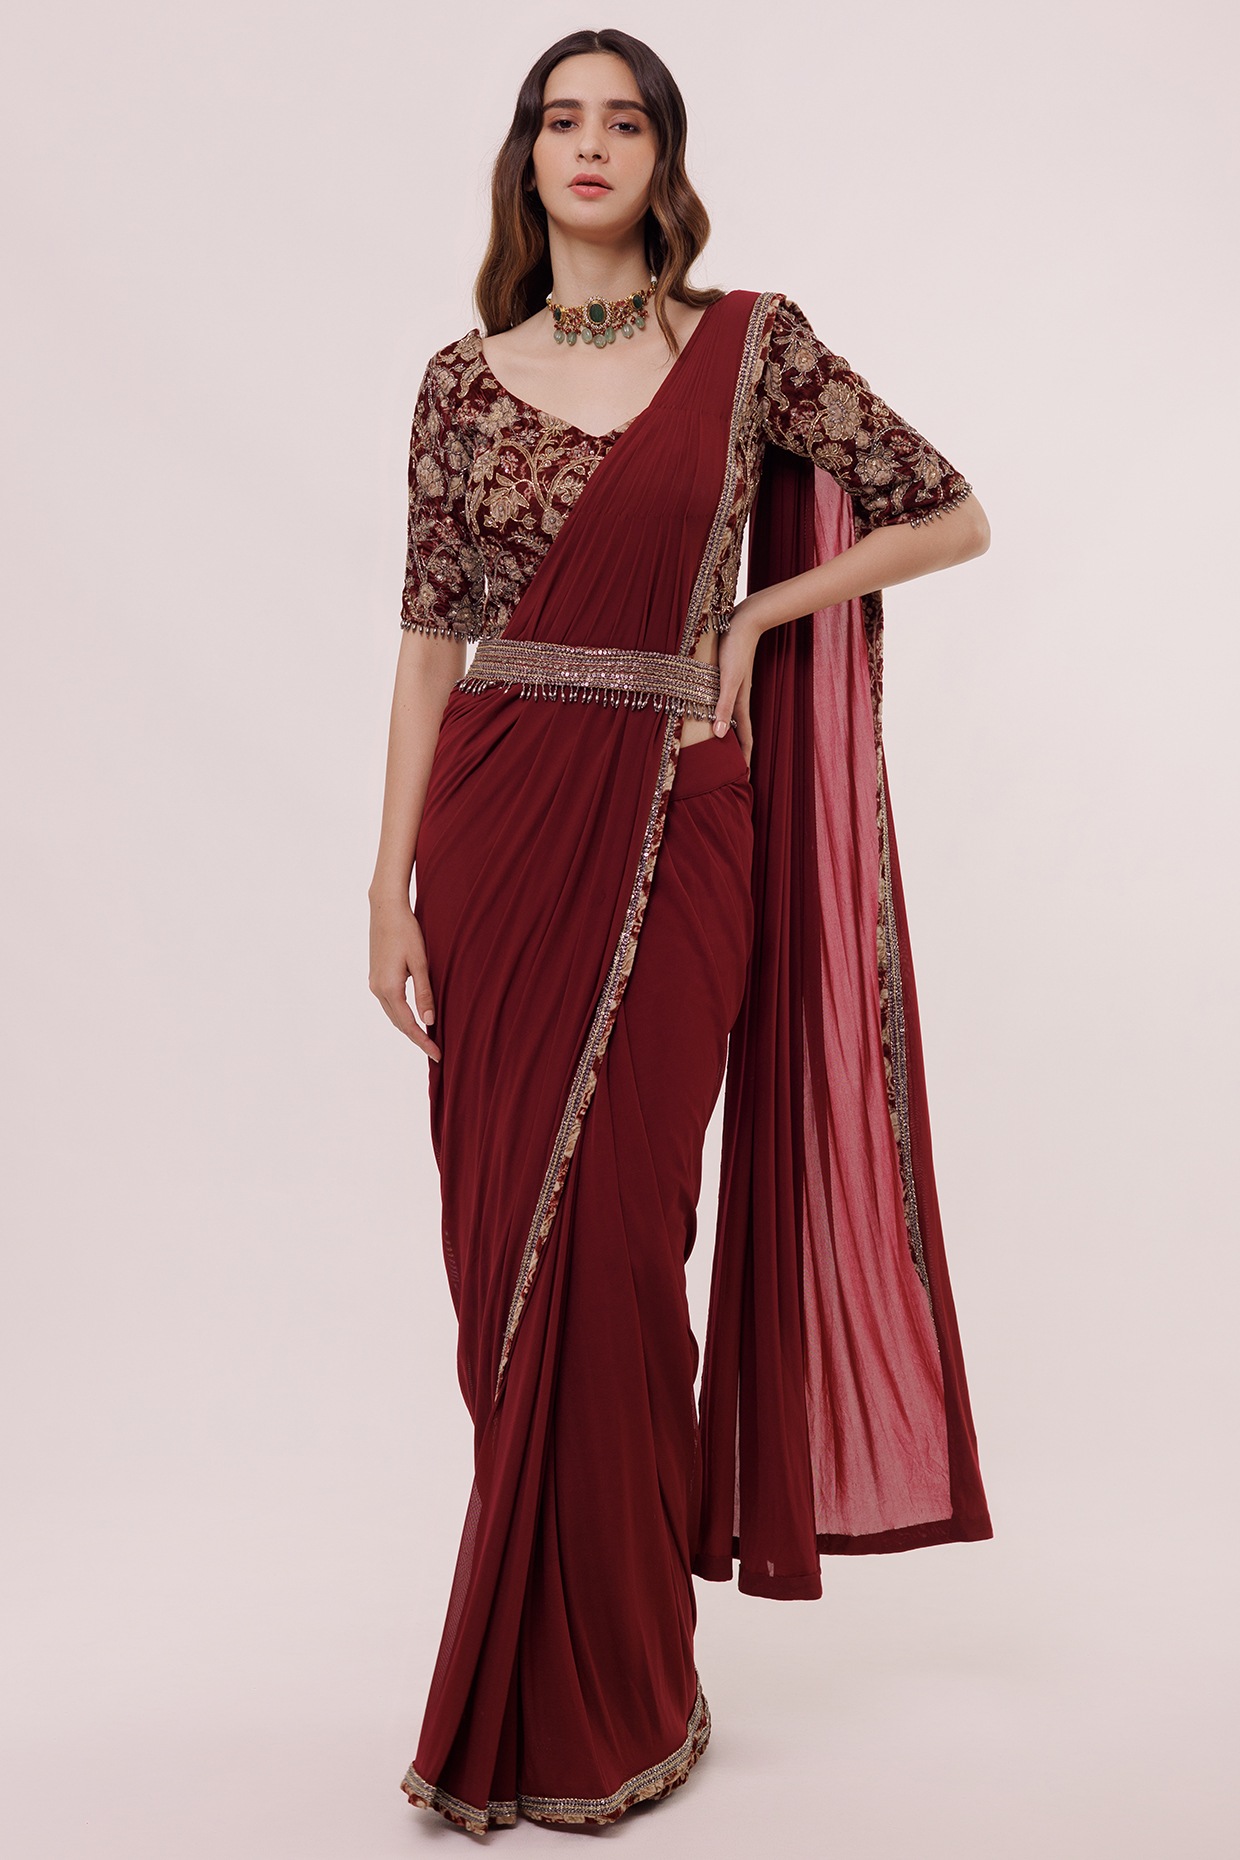 Buy Maroon Color New Design Soft Lichi Silk Design in All Over the Body  With Heavy Jaquard Border Design Full Body With South Indian Saree Online  in India - Etsy